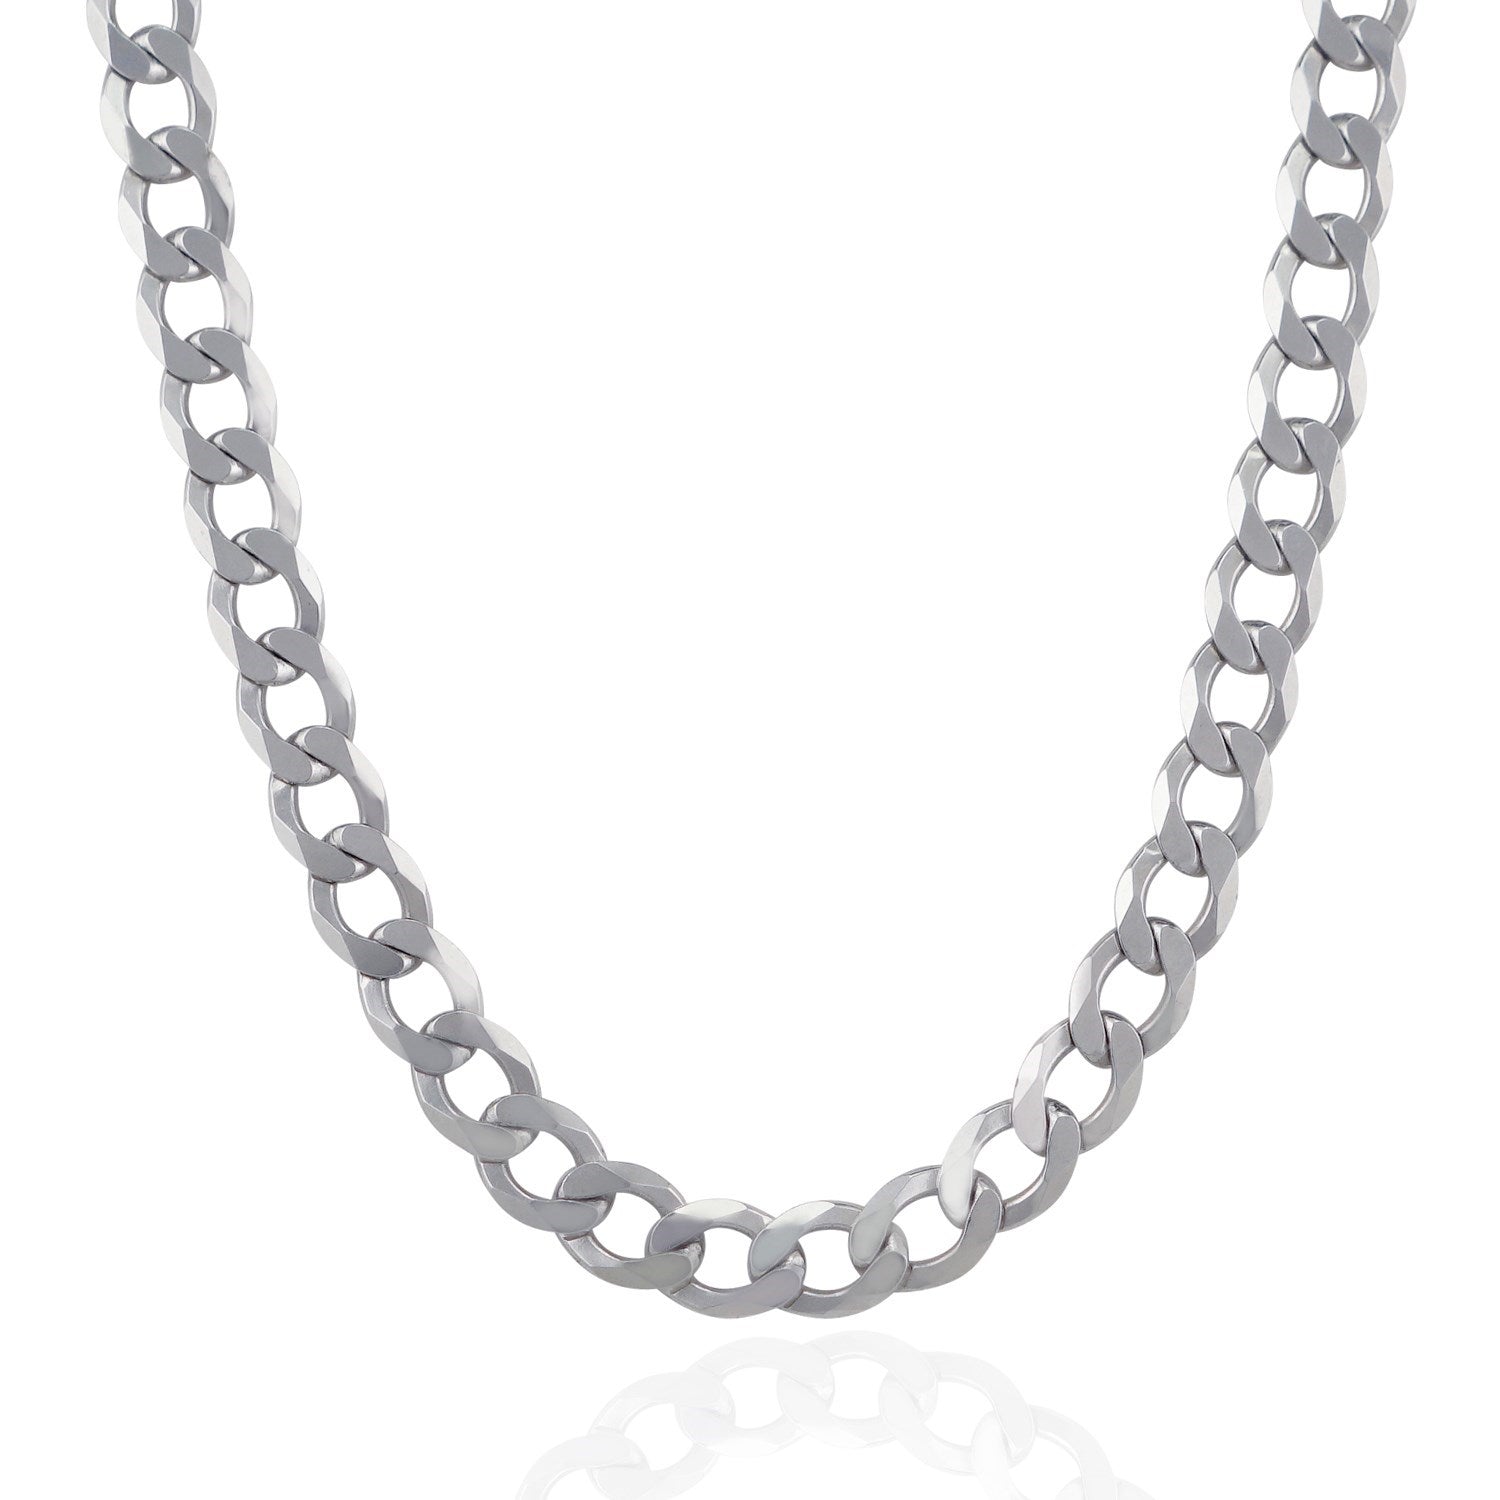 Rhodium Plated 9.5mm Sterling Silver Curb Style Chain